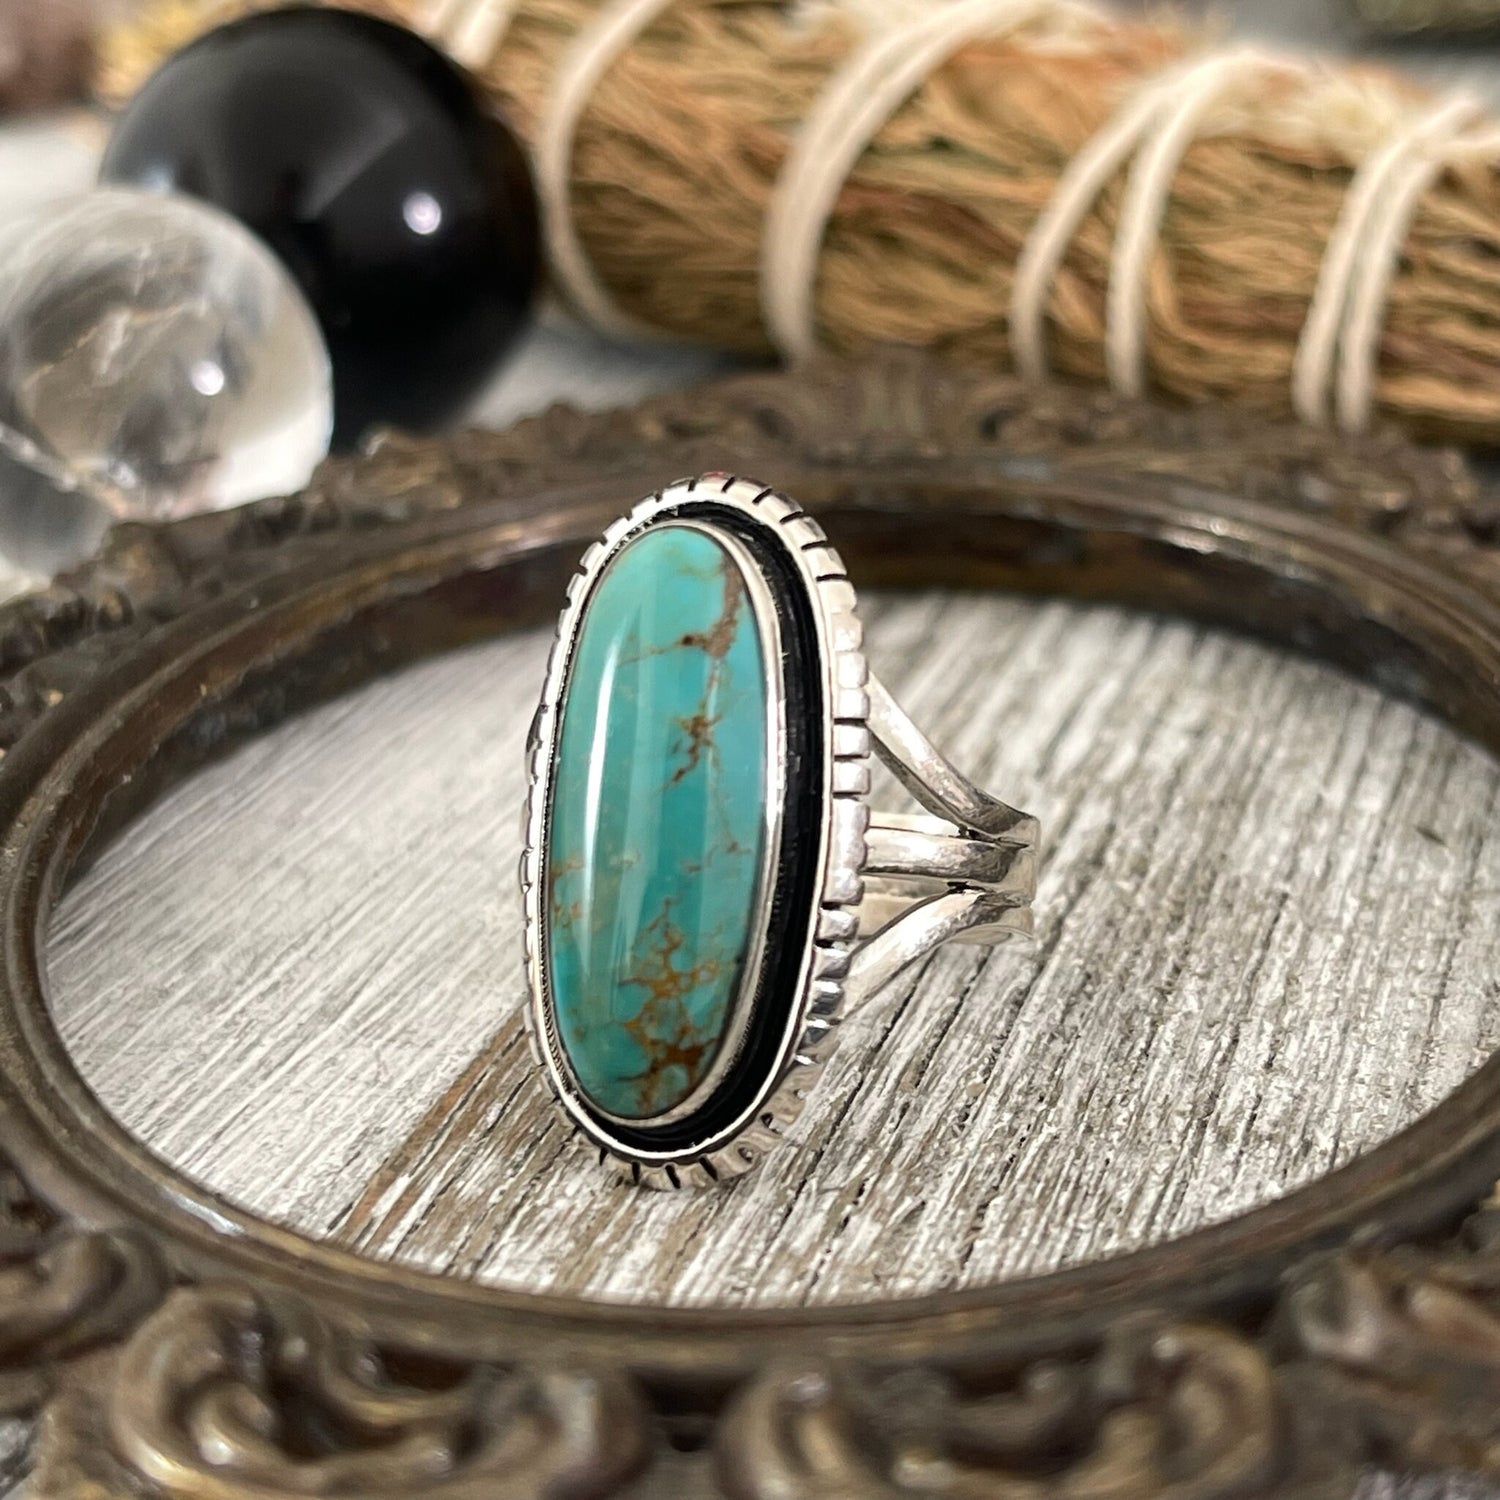 Size 9.5 Kingman Turquoise Statement Ring Set in Thick Sterling Silver / Curated by FOXLARK Collection